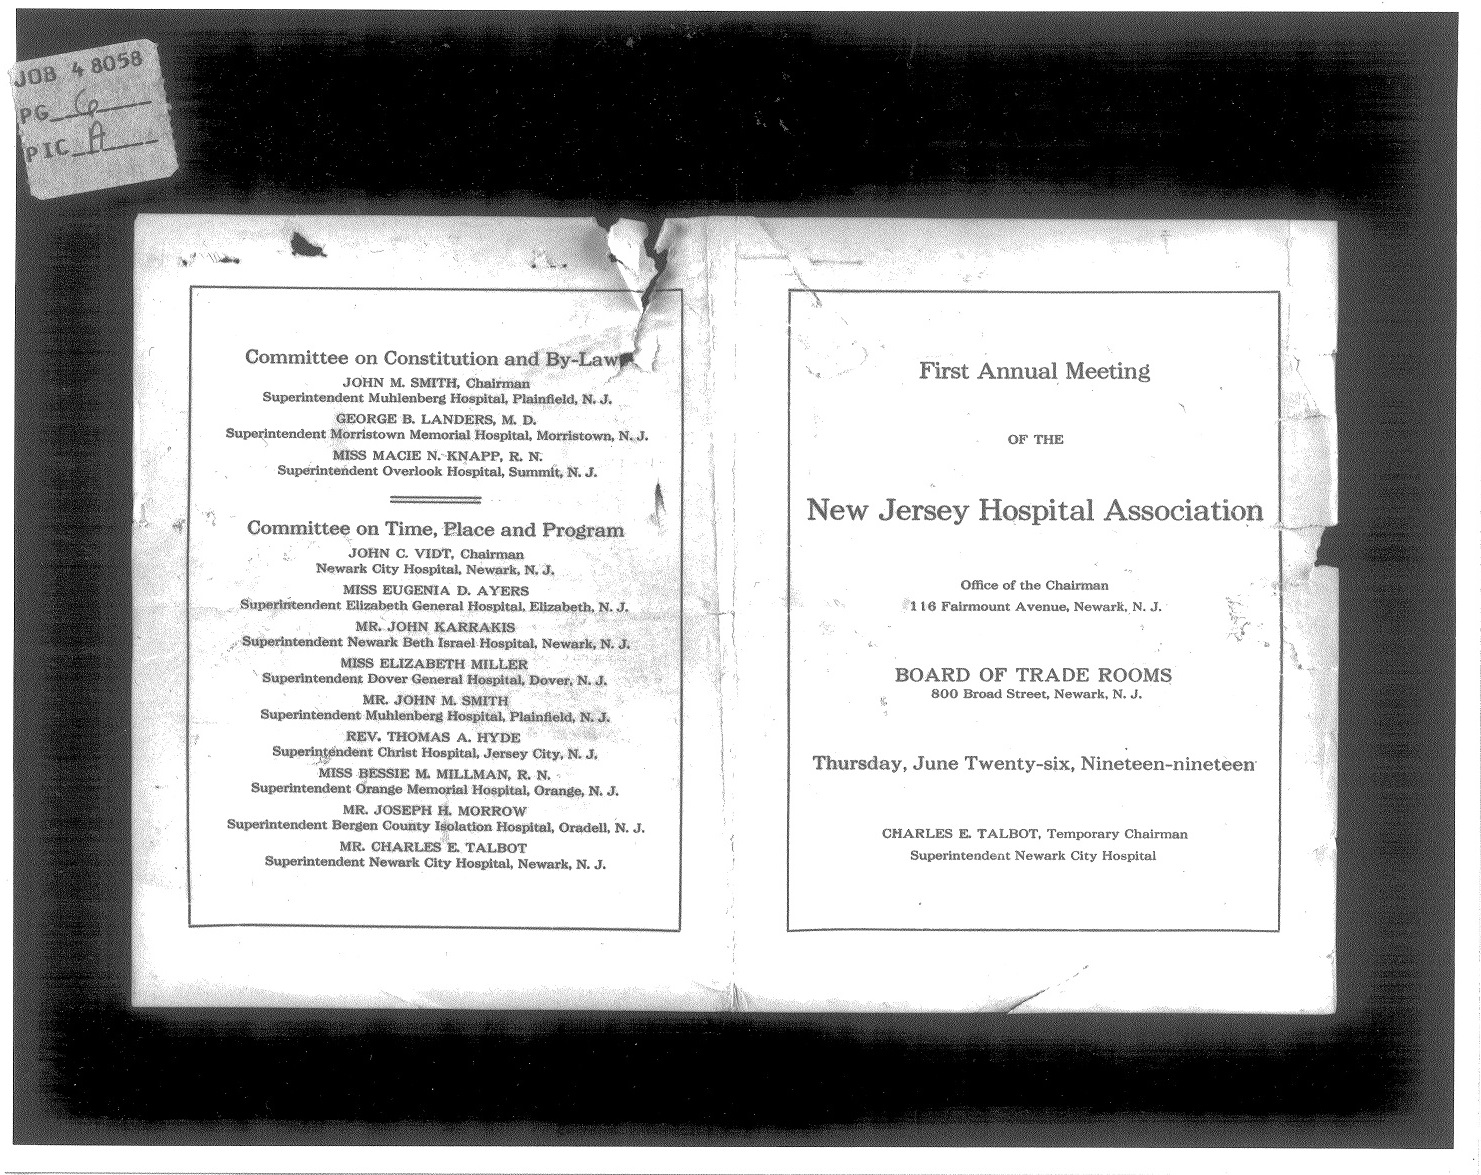 A program from the first NJHA Annual Meeting, in Newark.